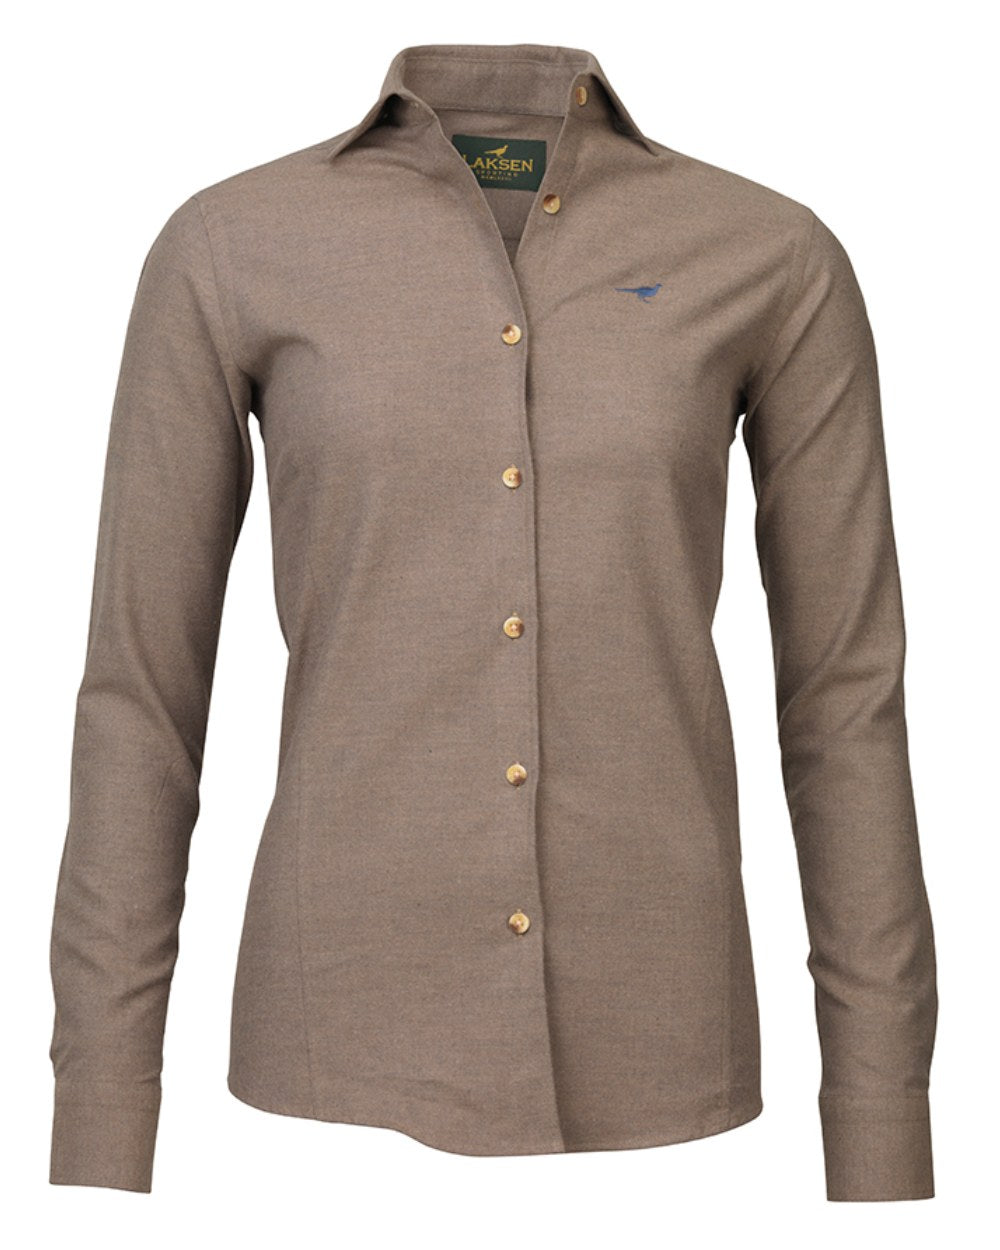 Camel Coloured Laksen Carrie Brushed Cotton Shirt On A White Background